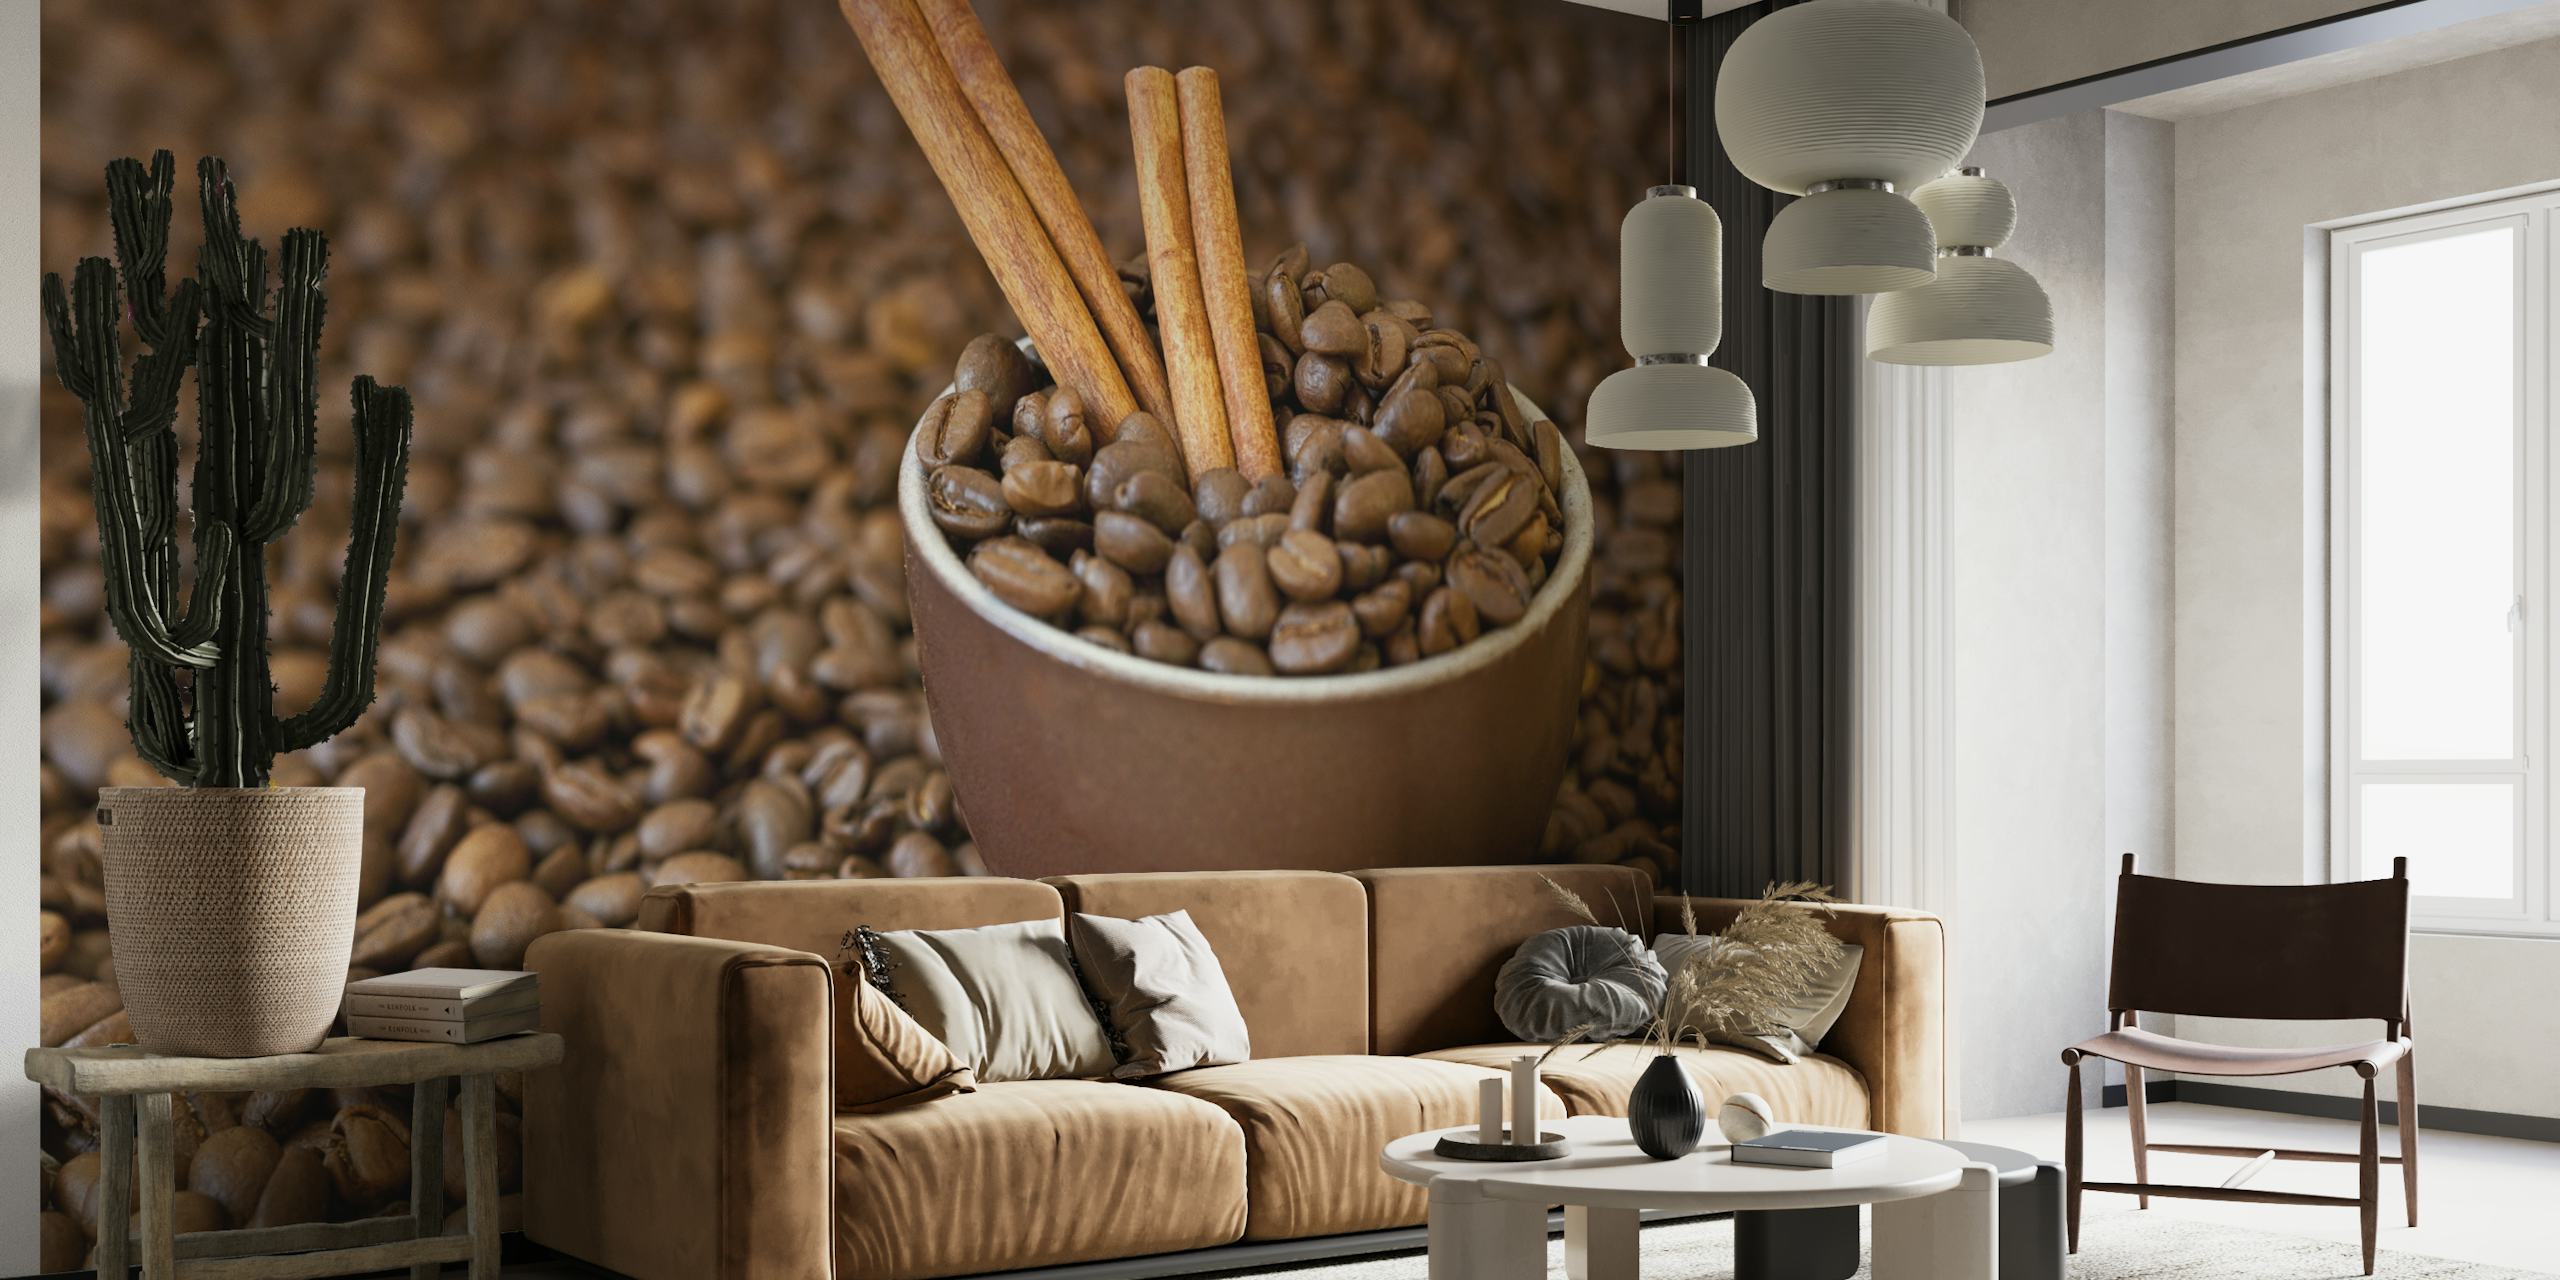 Cup full of coffee beans with cinnamon sticks wall mural